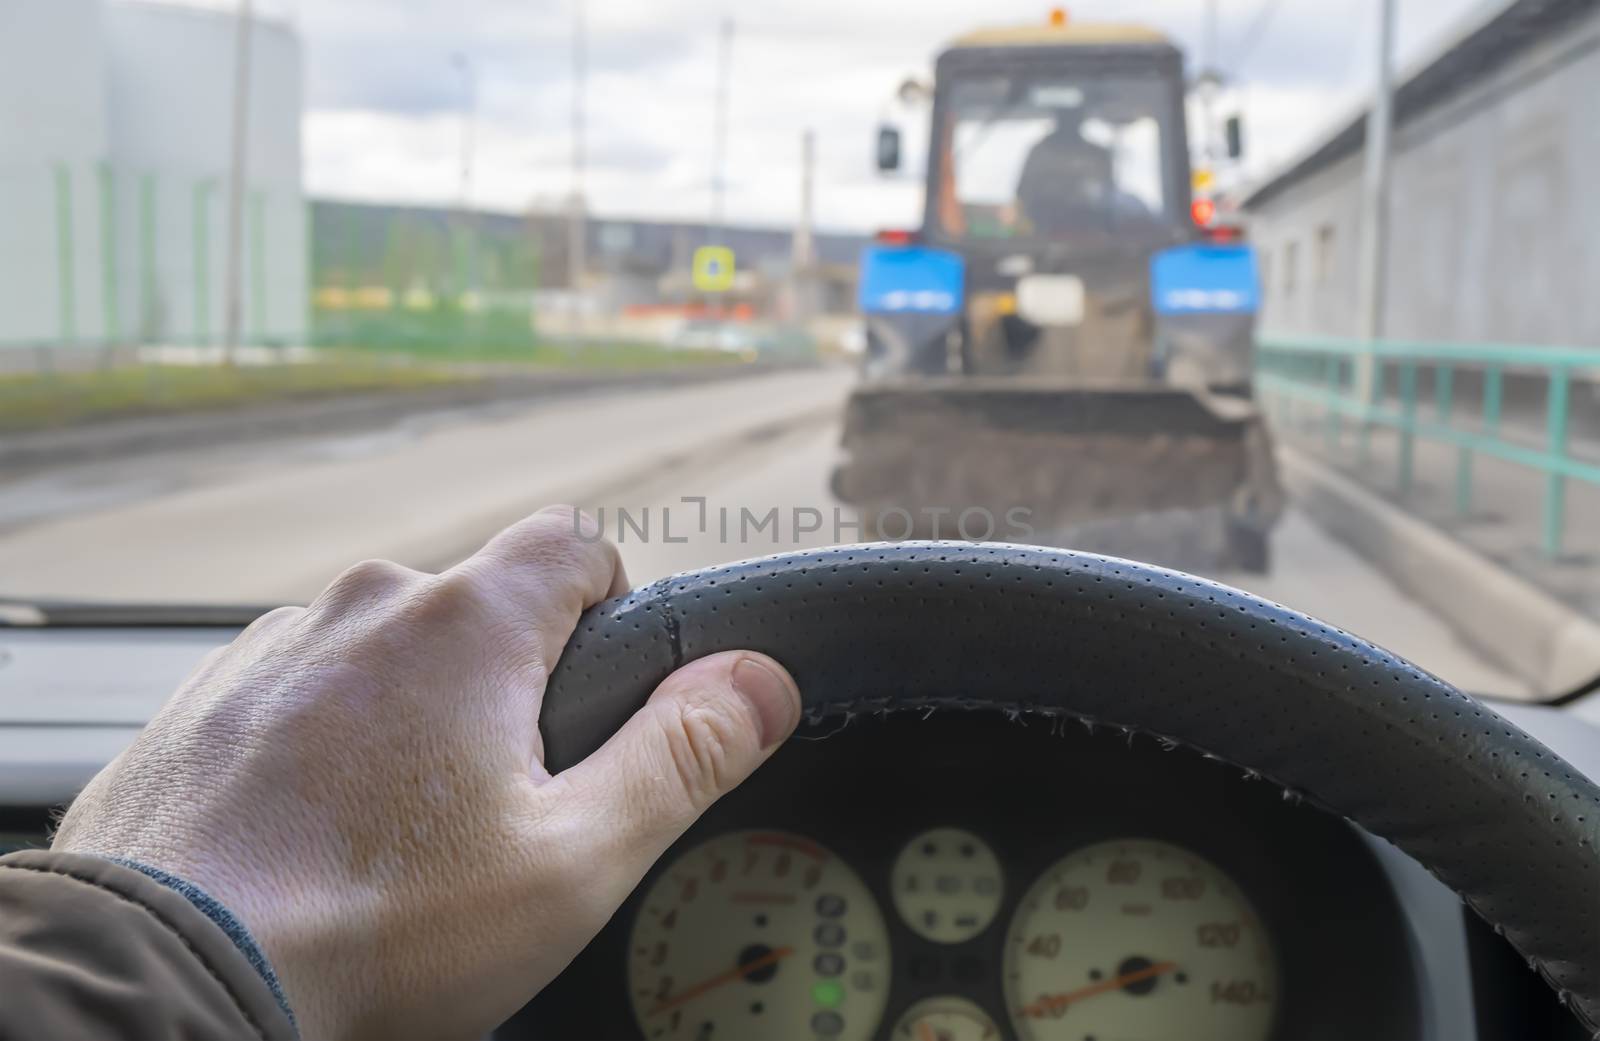 driver hand on the steering wheel of a car that is traveling on the roadway in a jam, makes a maneuver to overtake the tractor